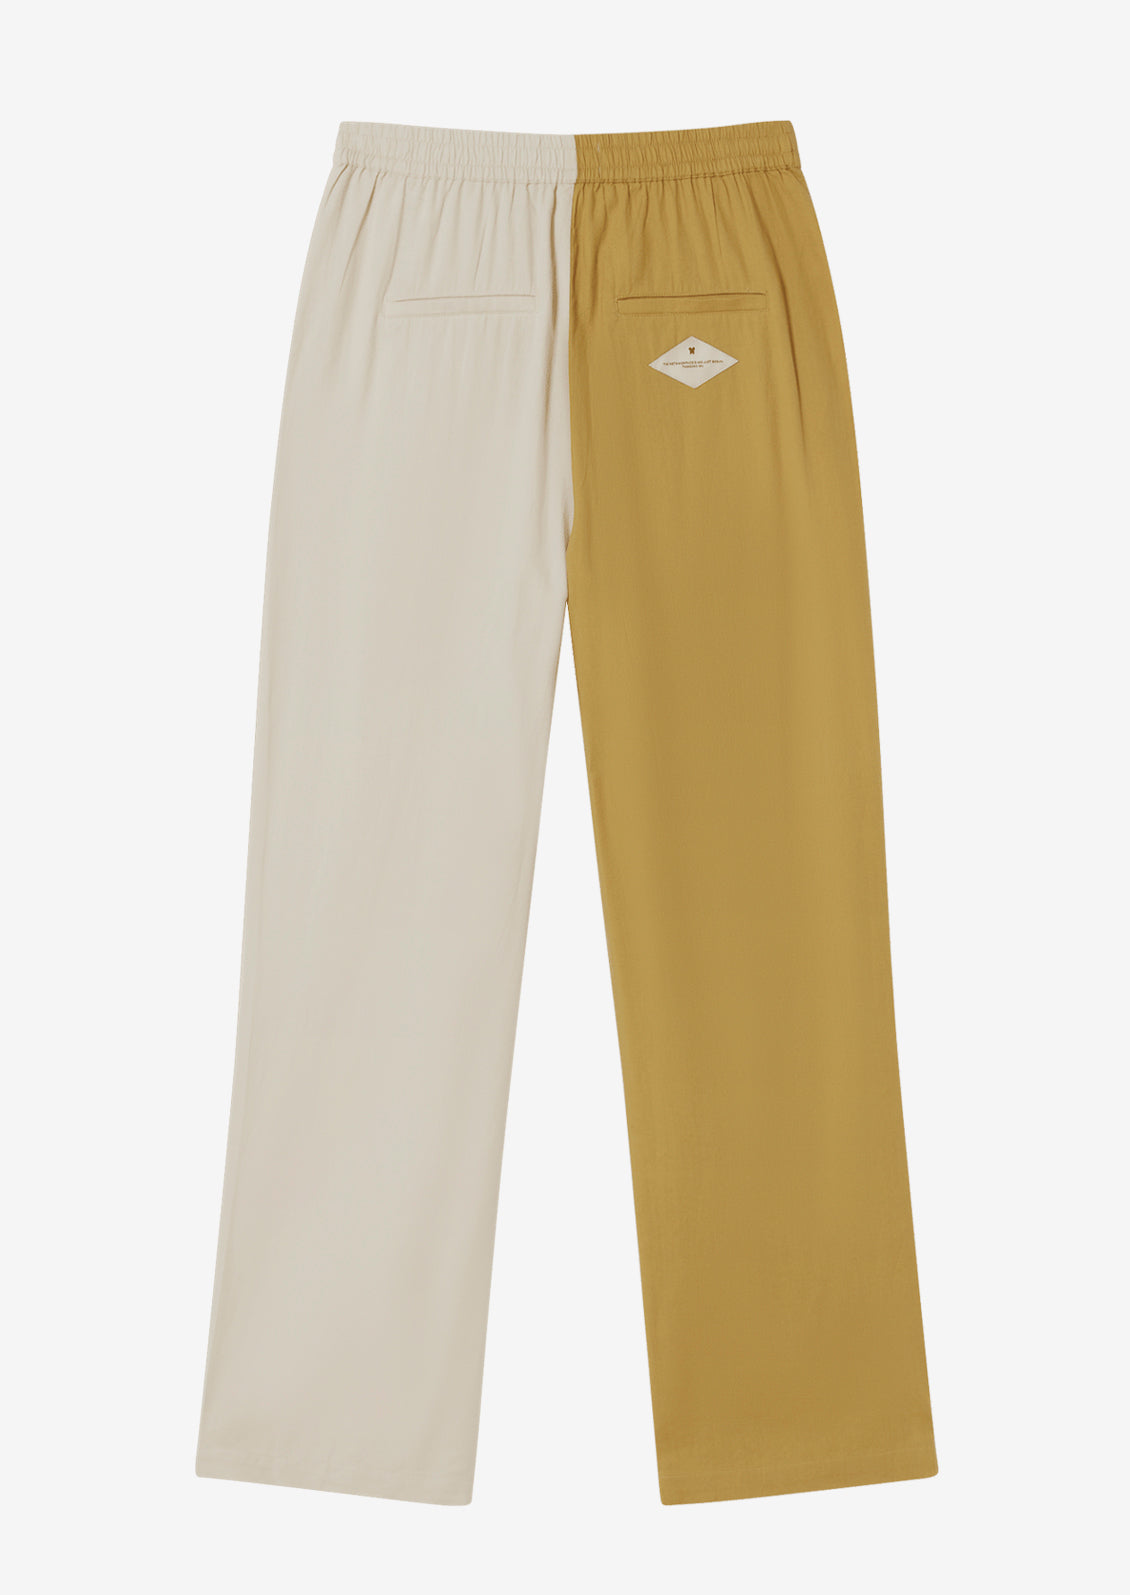 A pair of pants with one leg in yellow and one leg in cream.